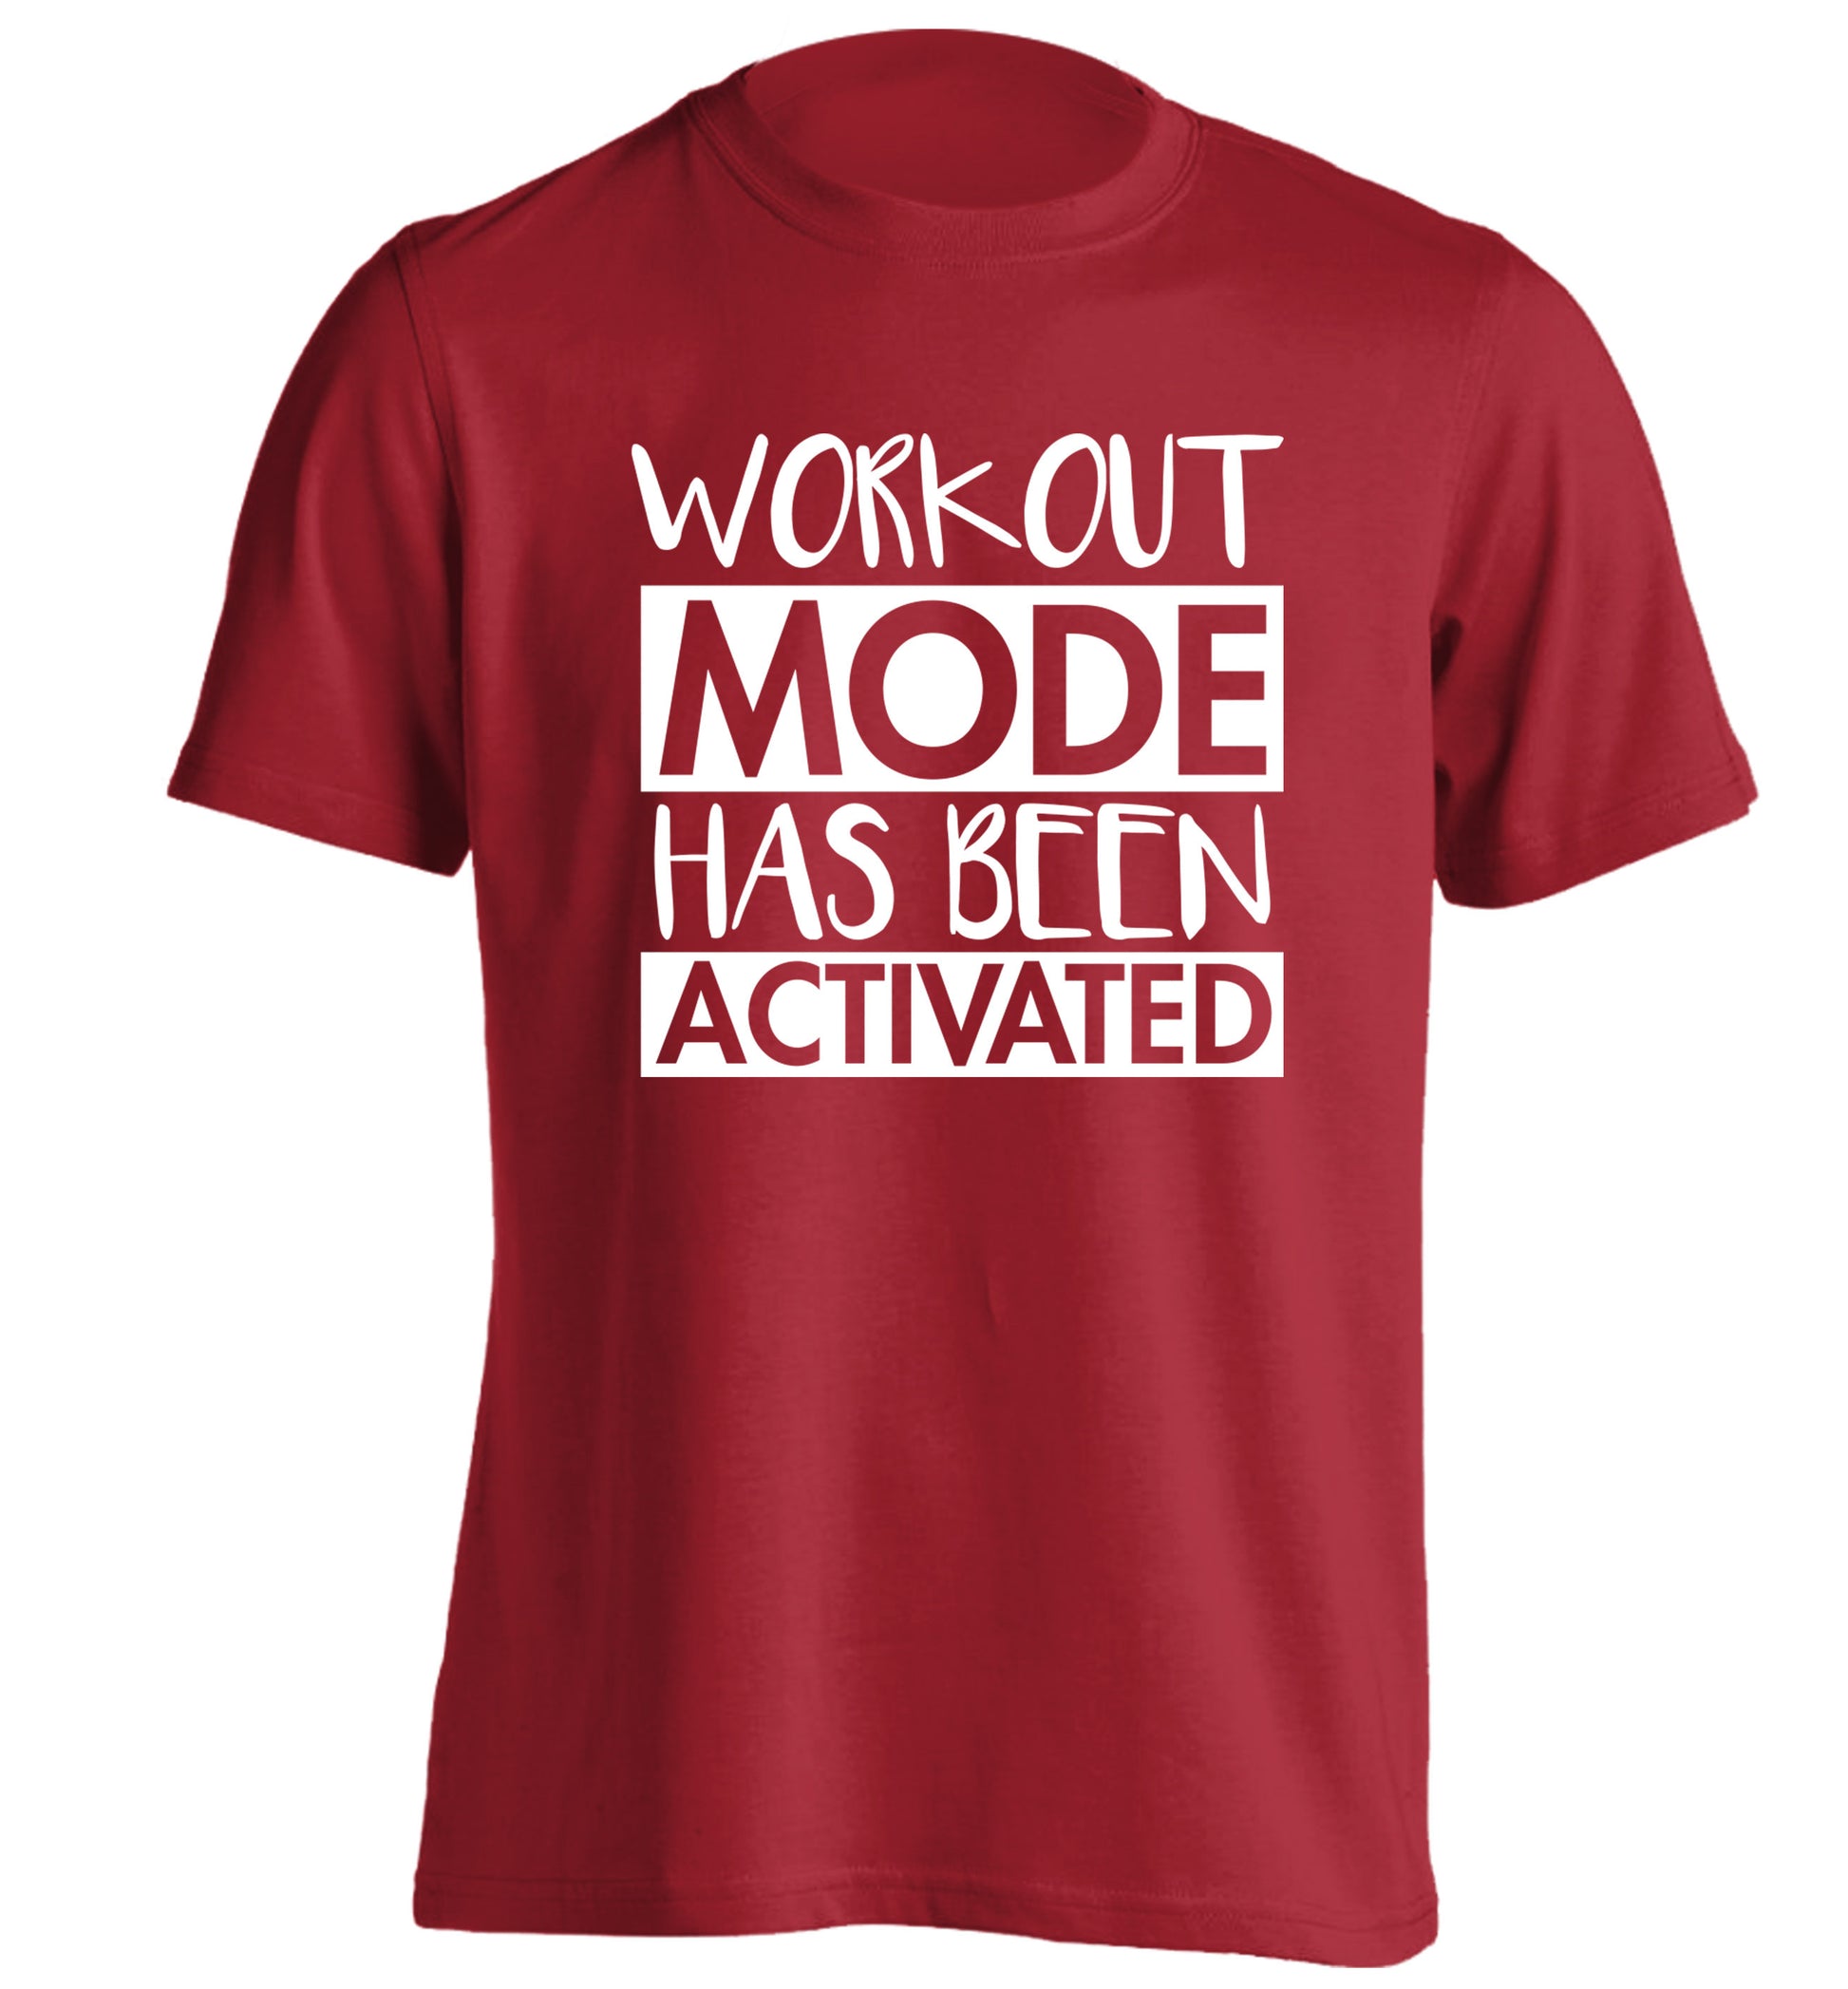 Workout mode has been activated adults unisex red Tshirt 2XL